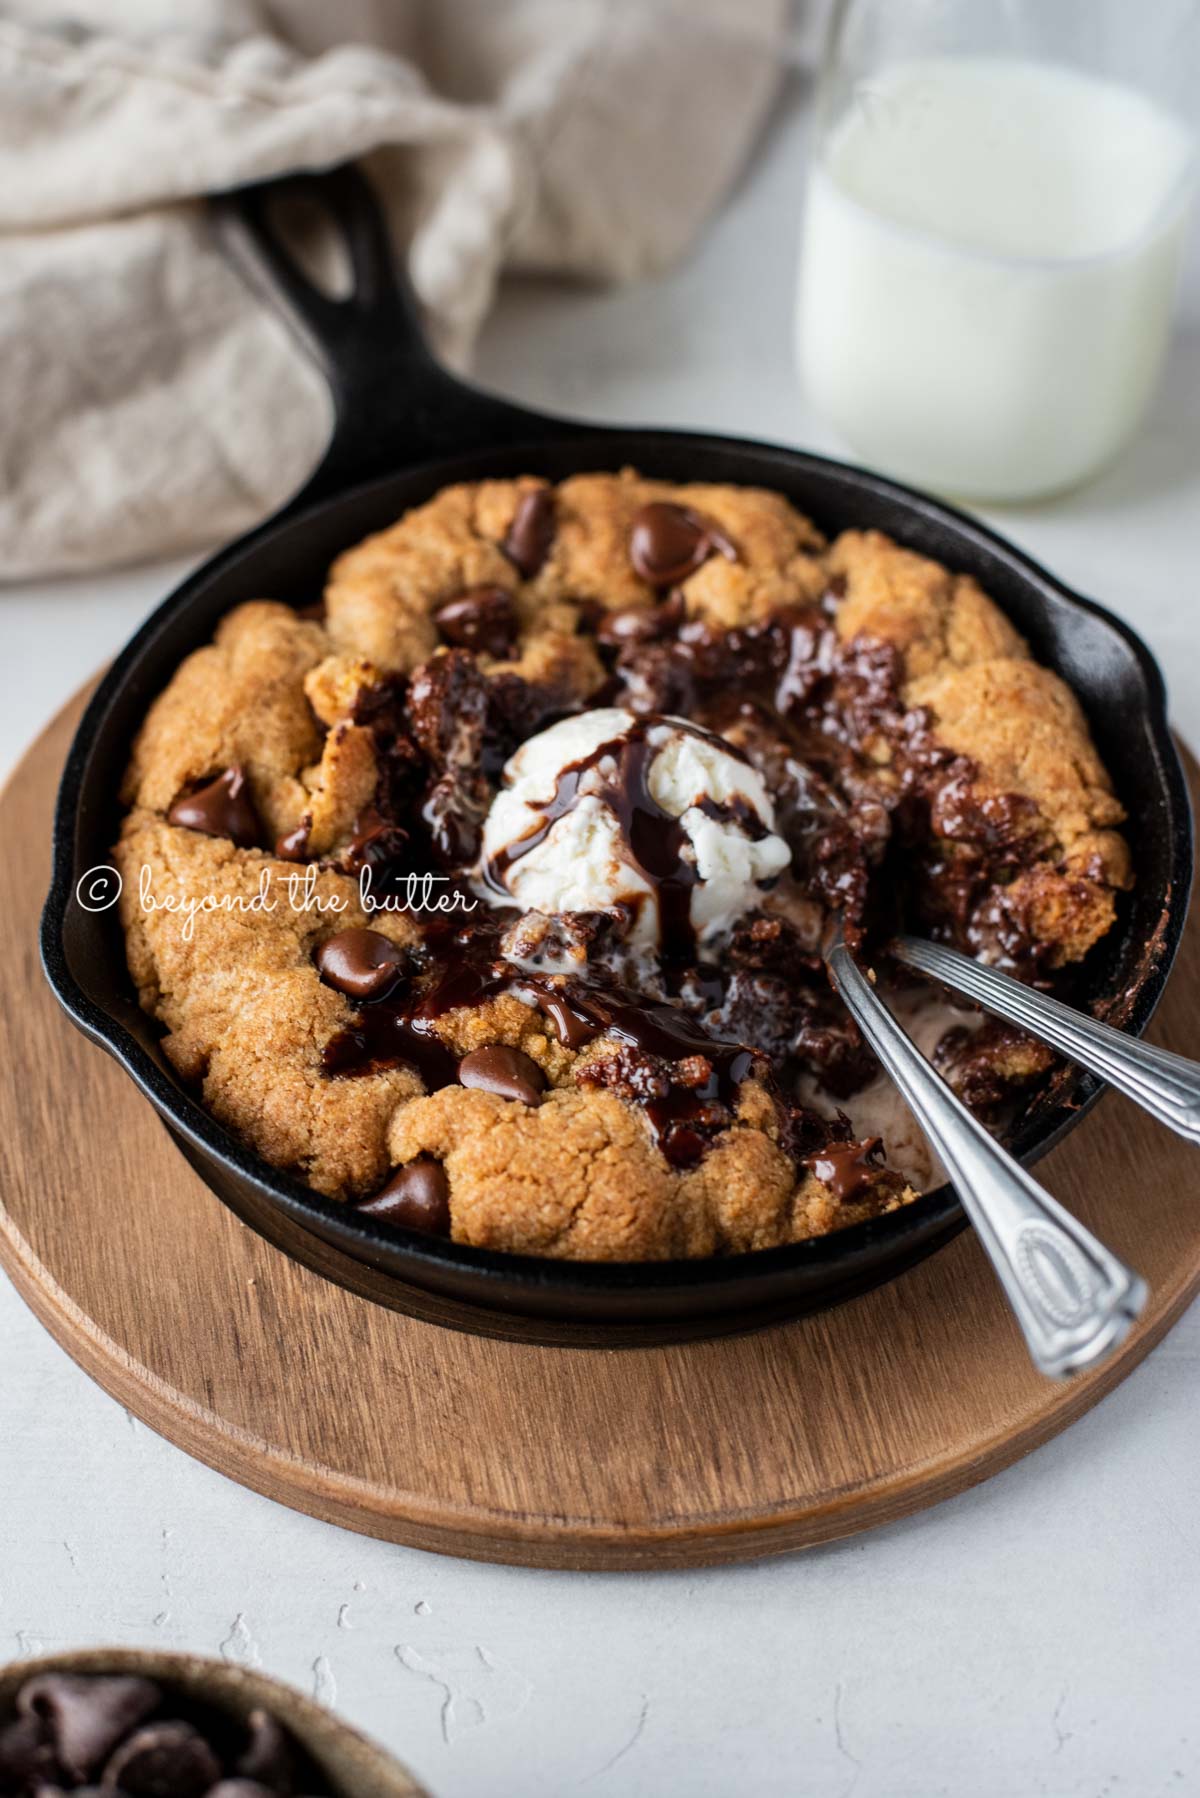 Warm chocolate chip skillet cookie with scoop of vanilla ice cream and two spoons resting in skillet on wood trivet.